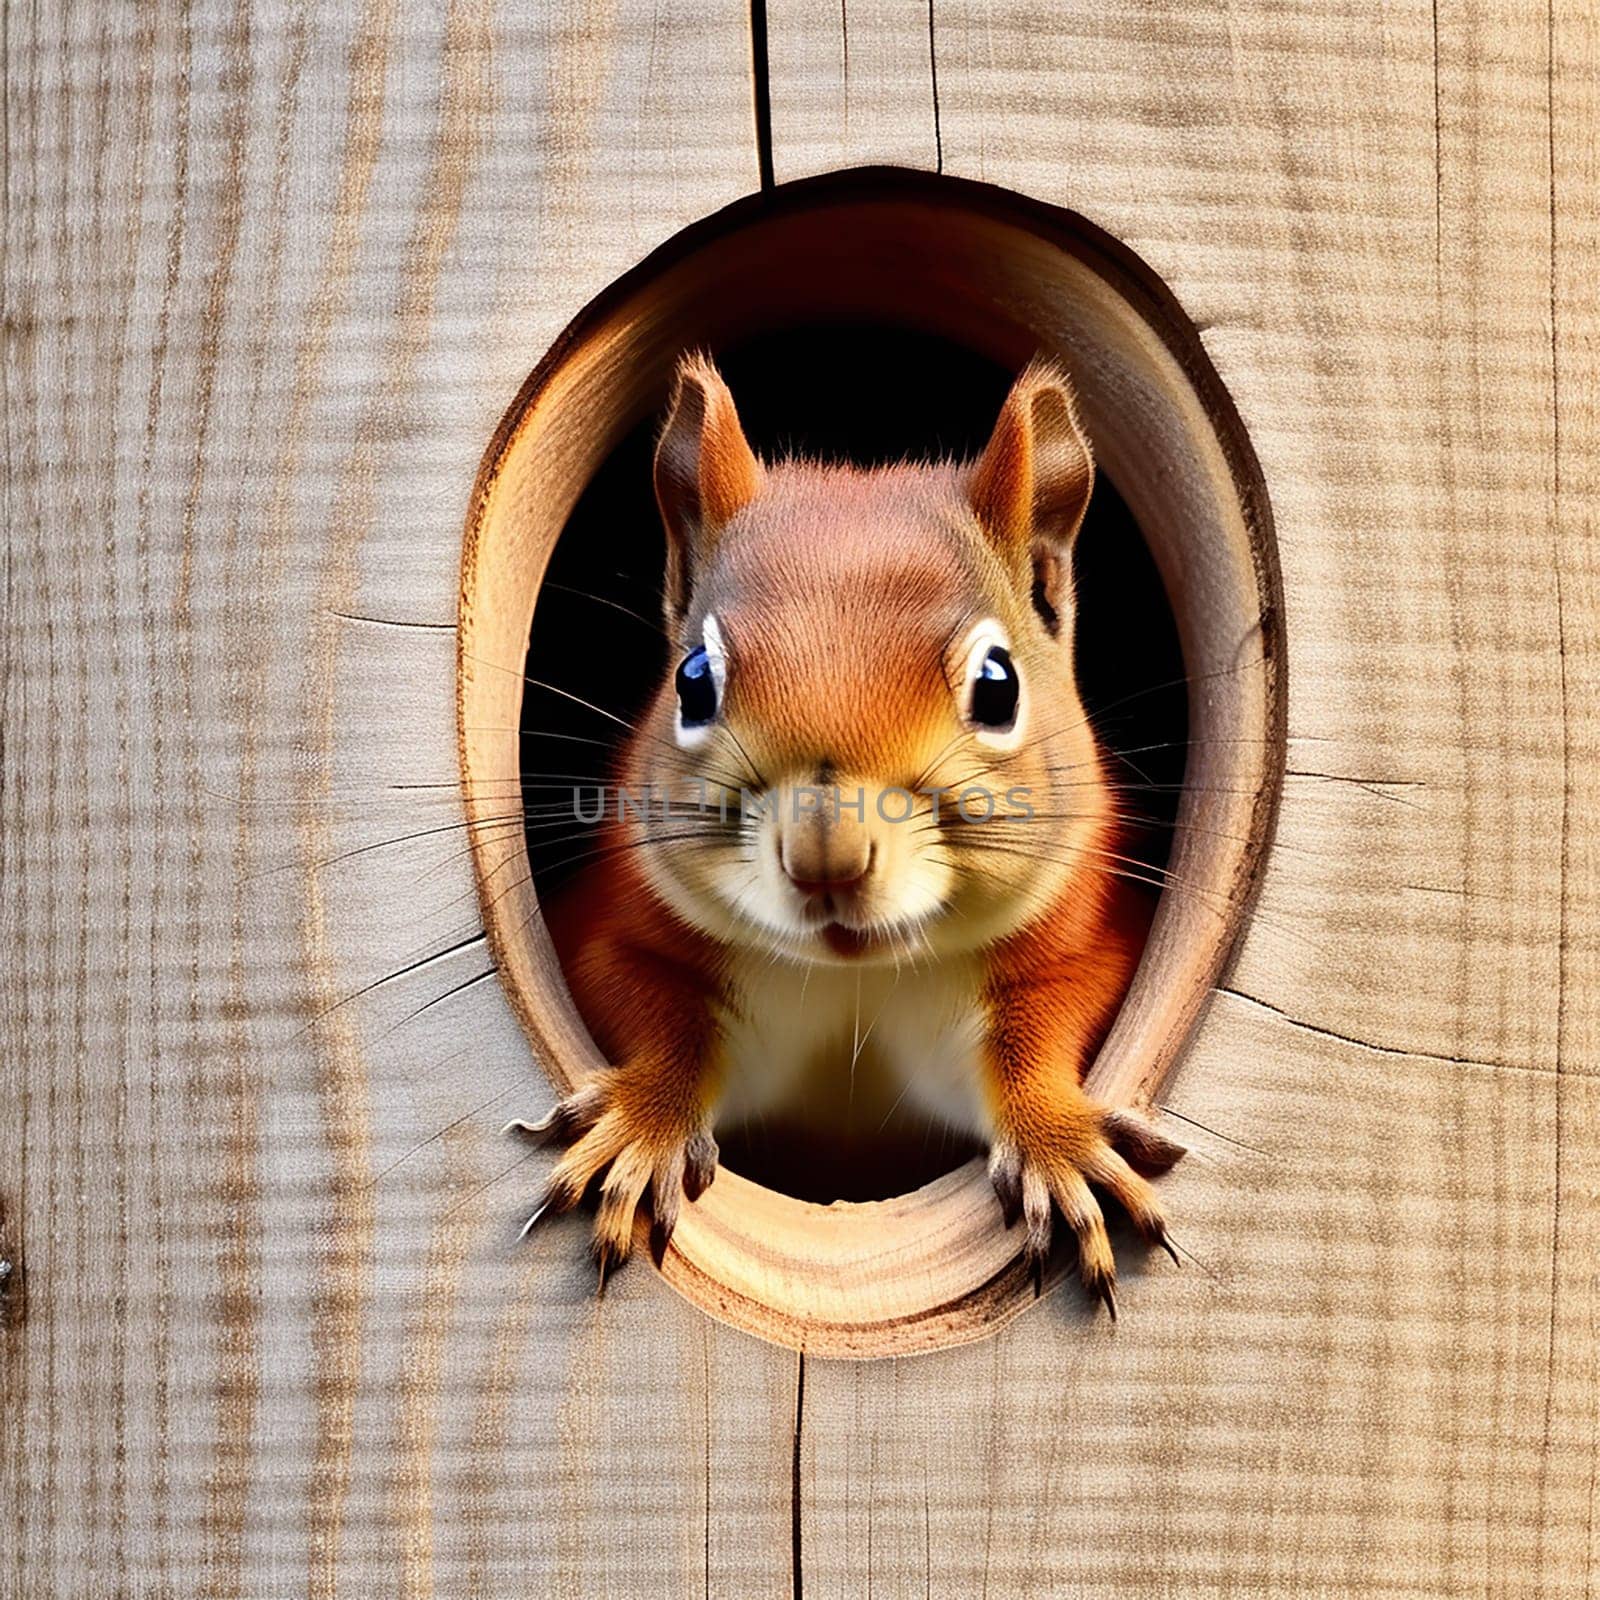 Baby Red Squirrel Peeking Out of Wood Hole